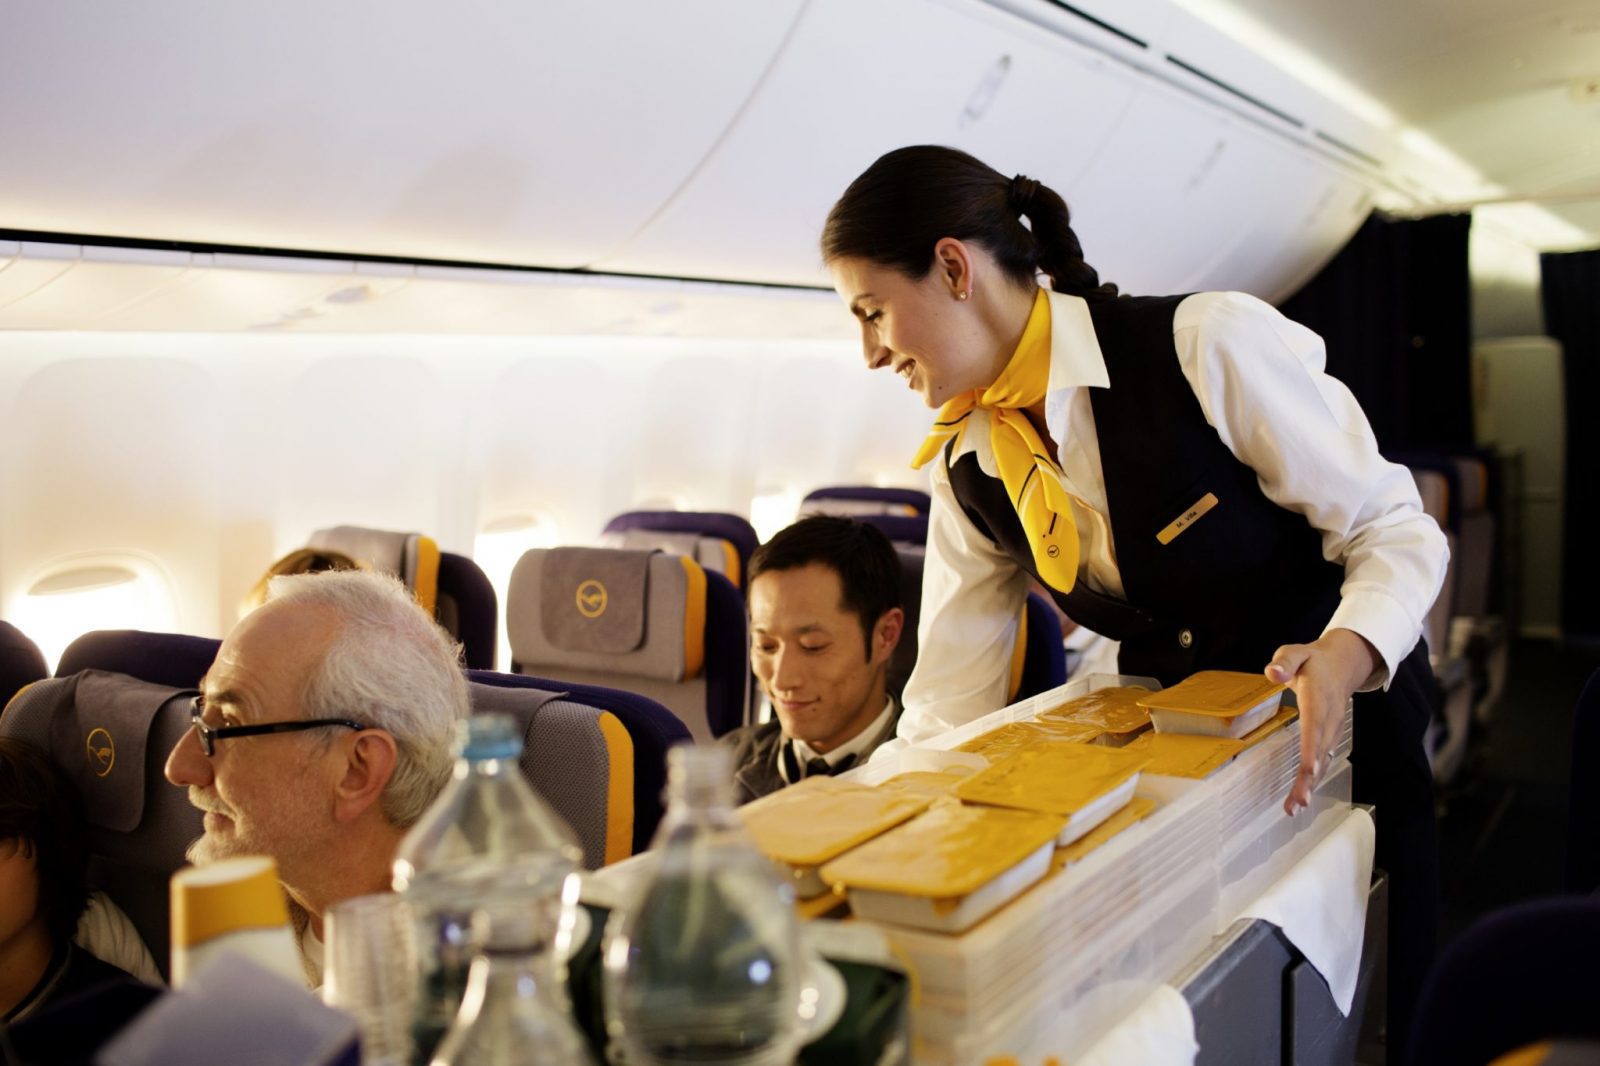 a flight attendant serving people on an airplane